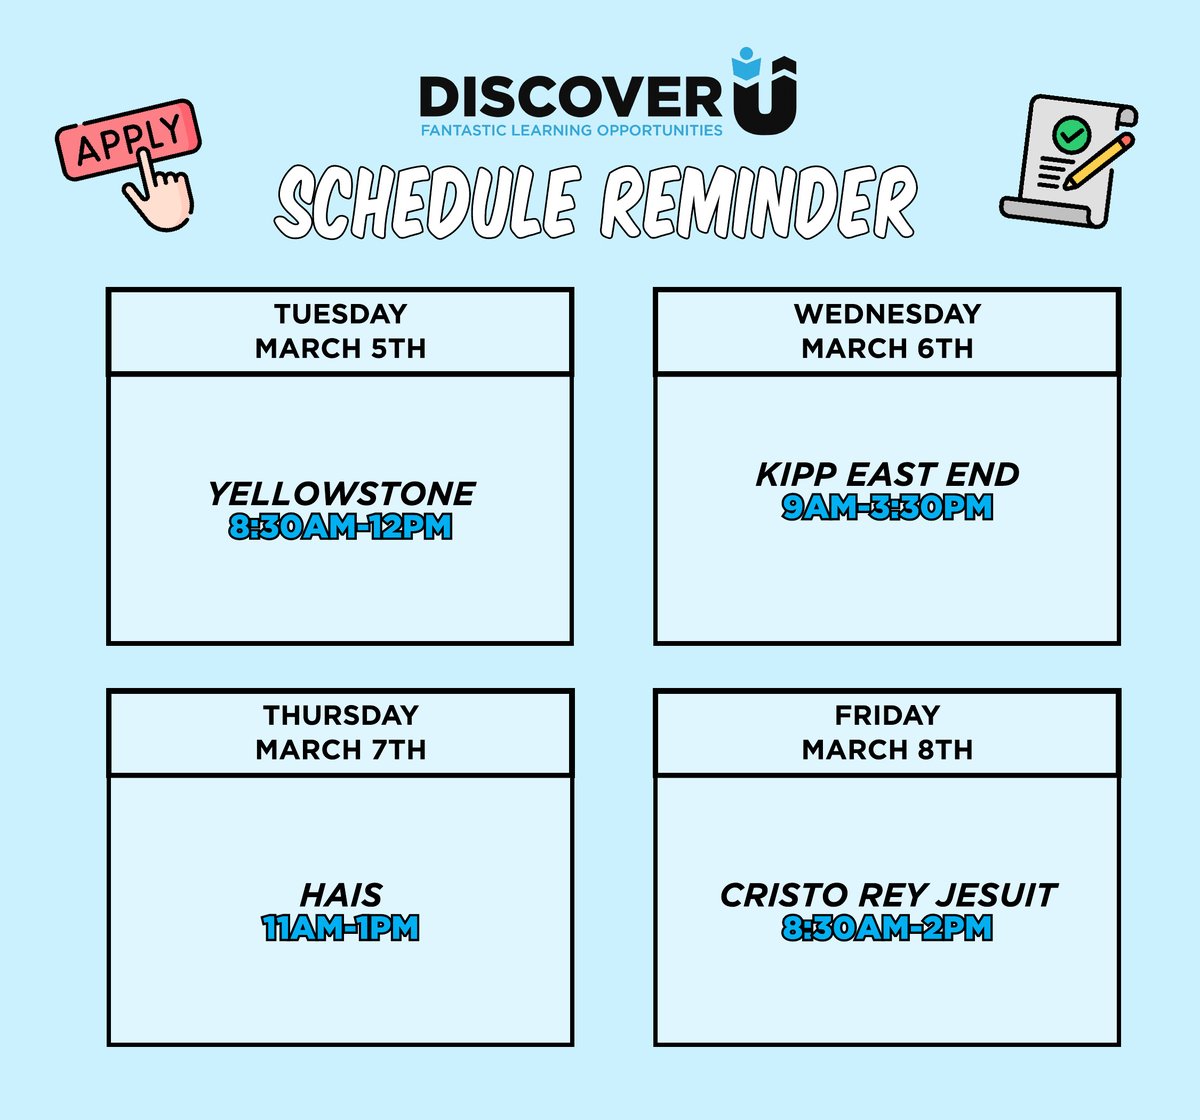 🗓️Our DU Advisors will be at Yellowstone @YellowstoneEdu, KIPP East End @KIPP, HAIS @HAIS_ECHS, and Cristo Rey Jesuit @cristoreyjesuit this week! Stop by for application support if you need it!!💙📝 #ExperienceMatters #DiscoverU #WeeklySchedule